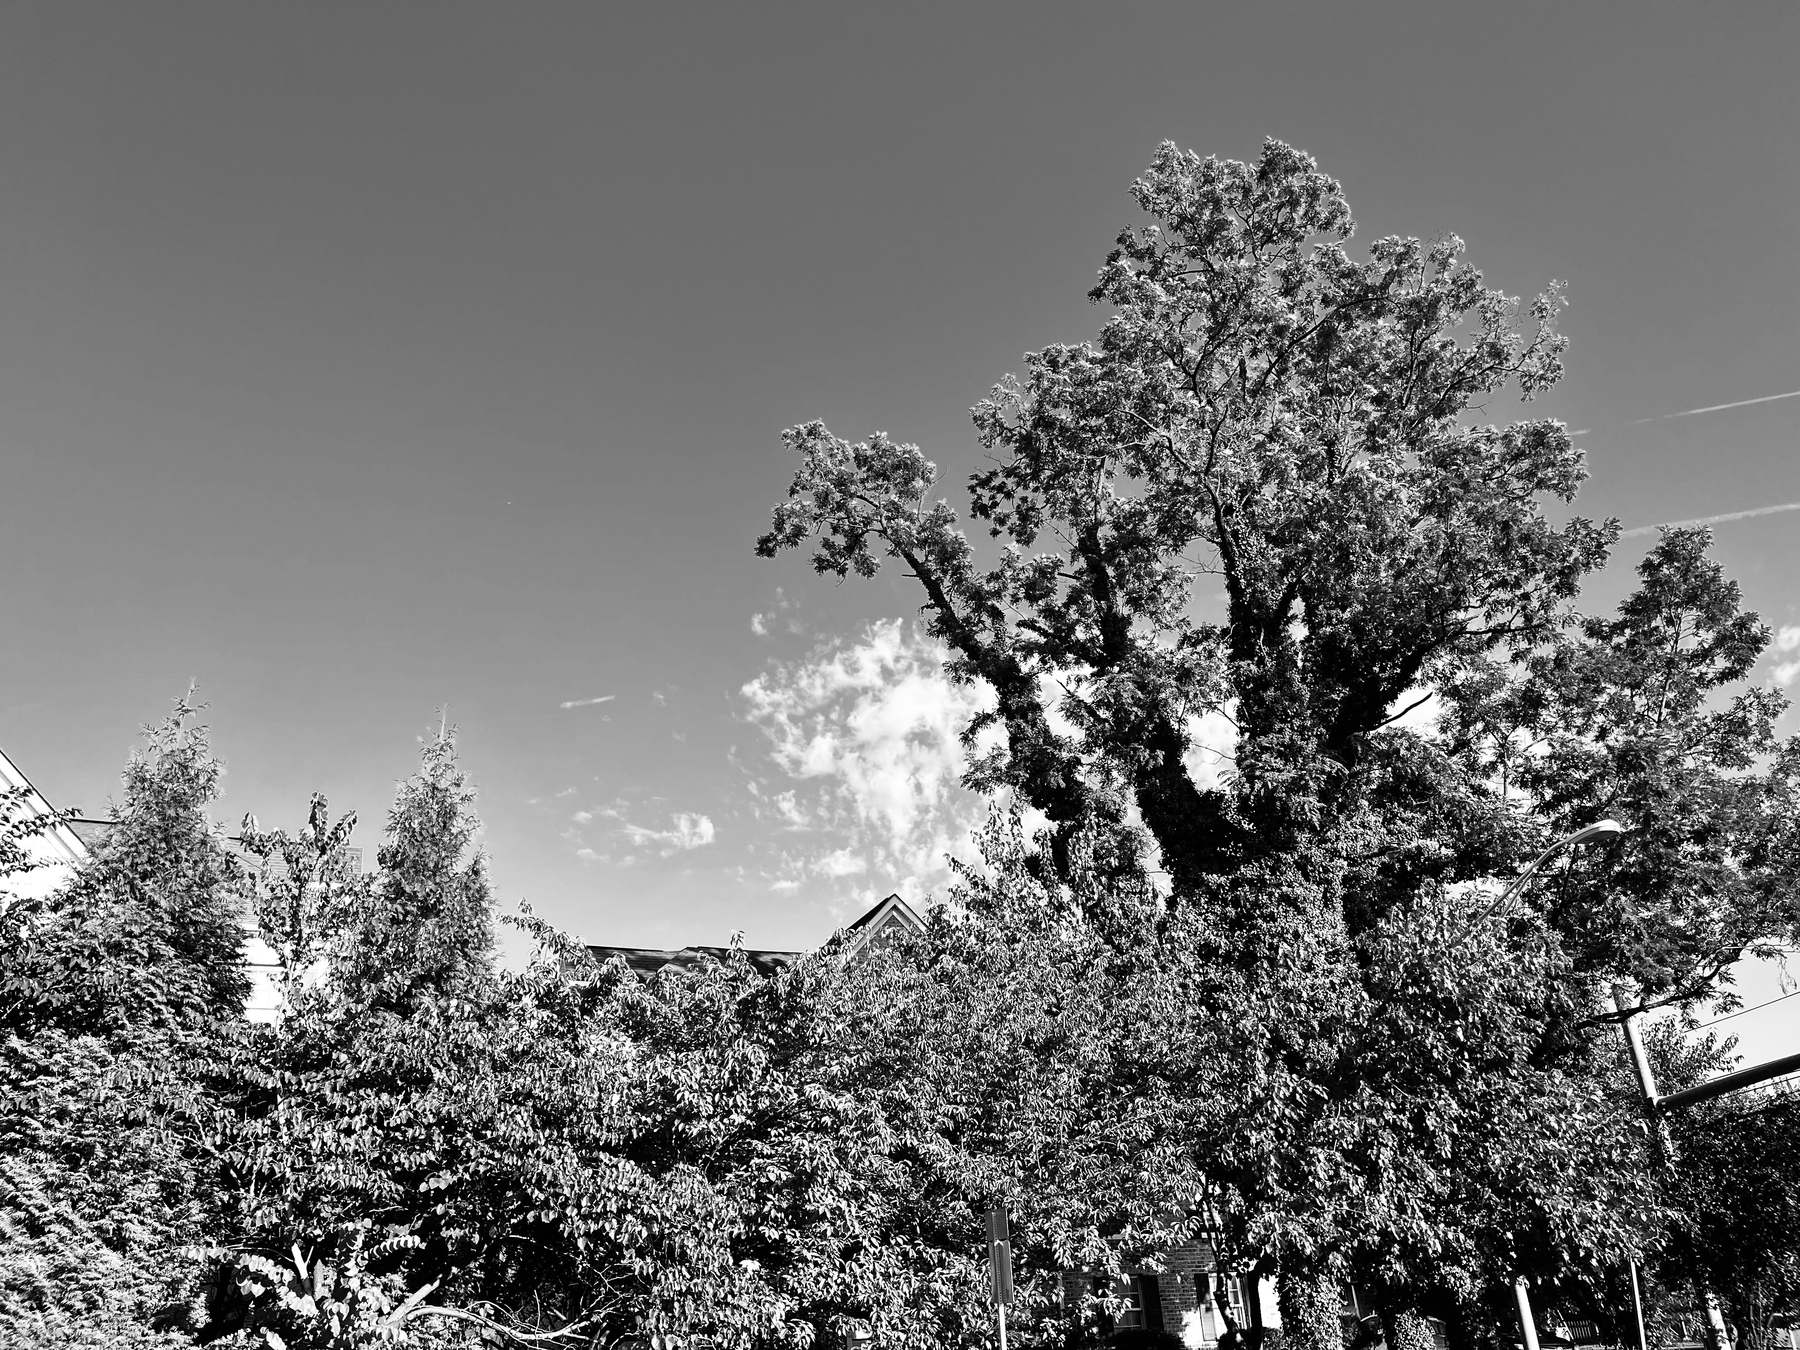 Black & White sky with trees. 